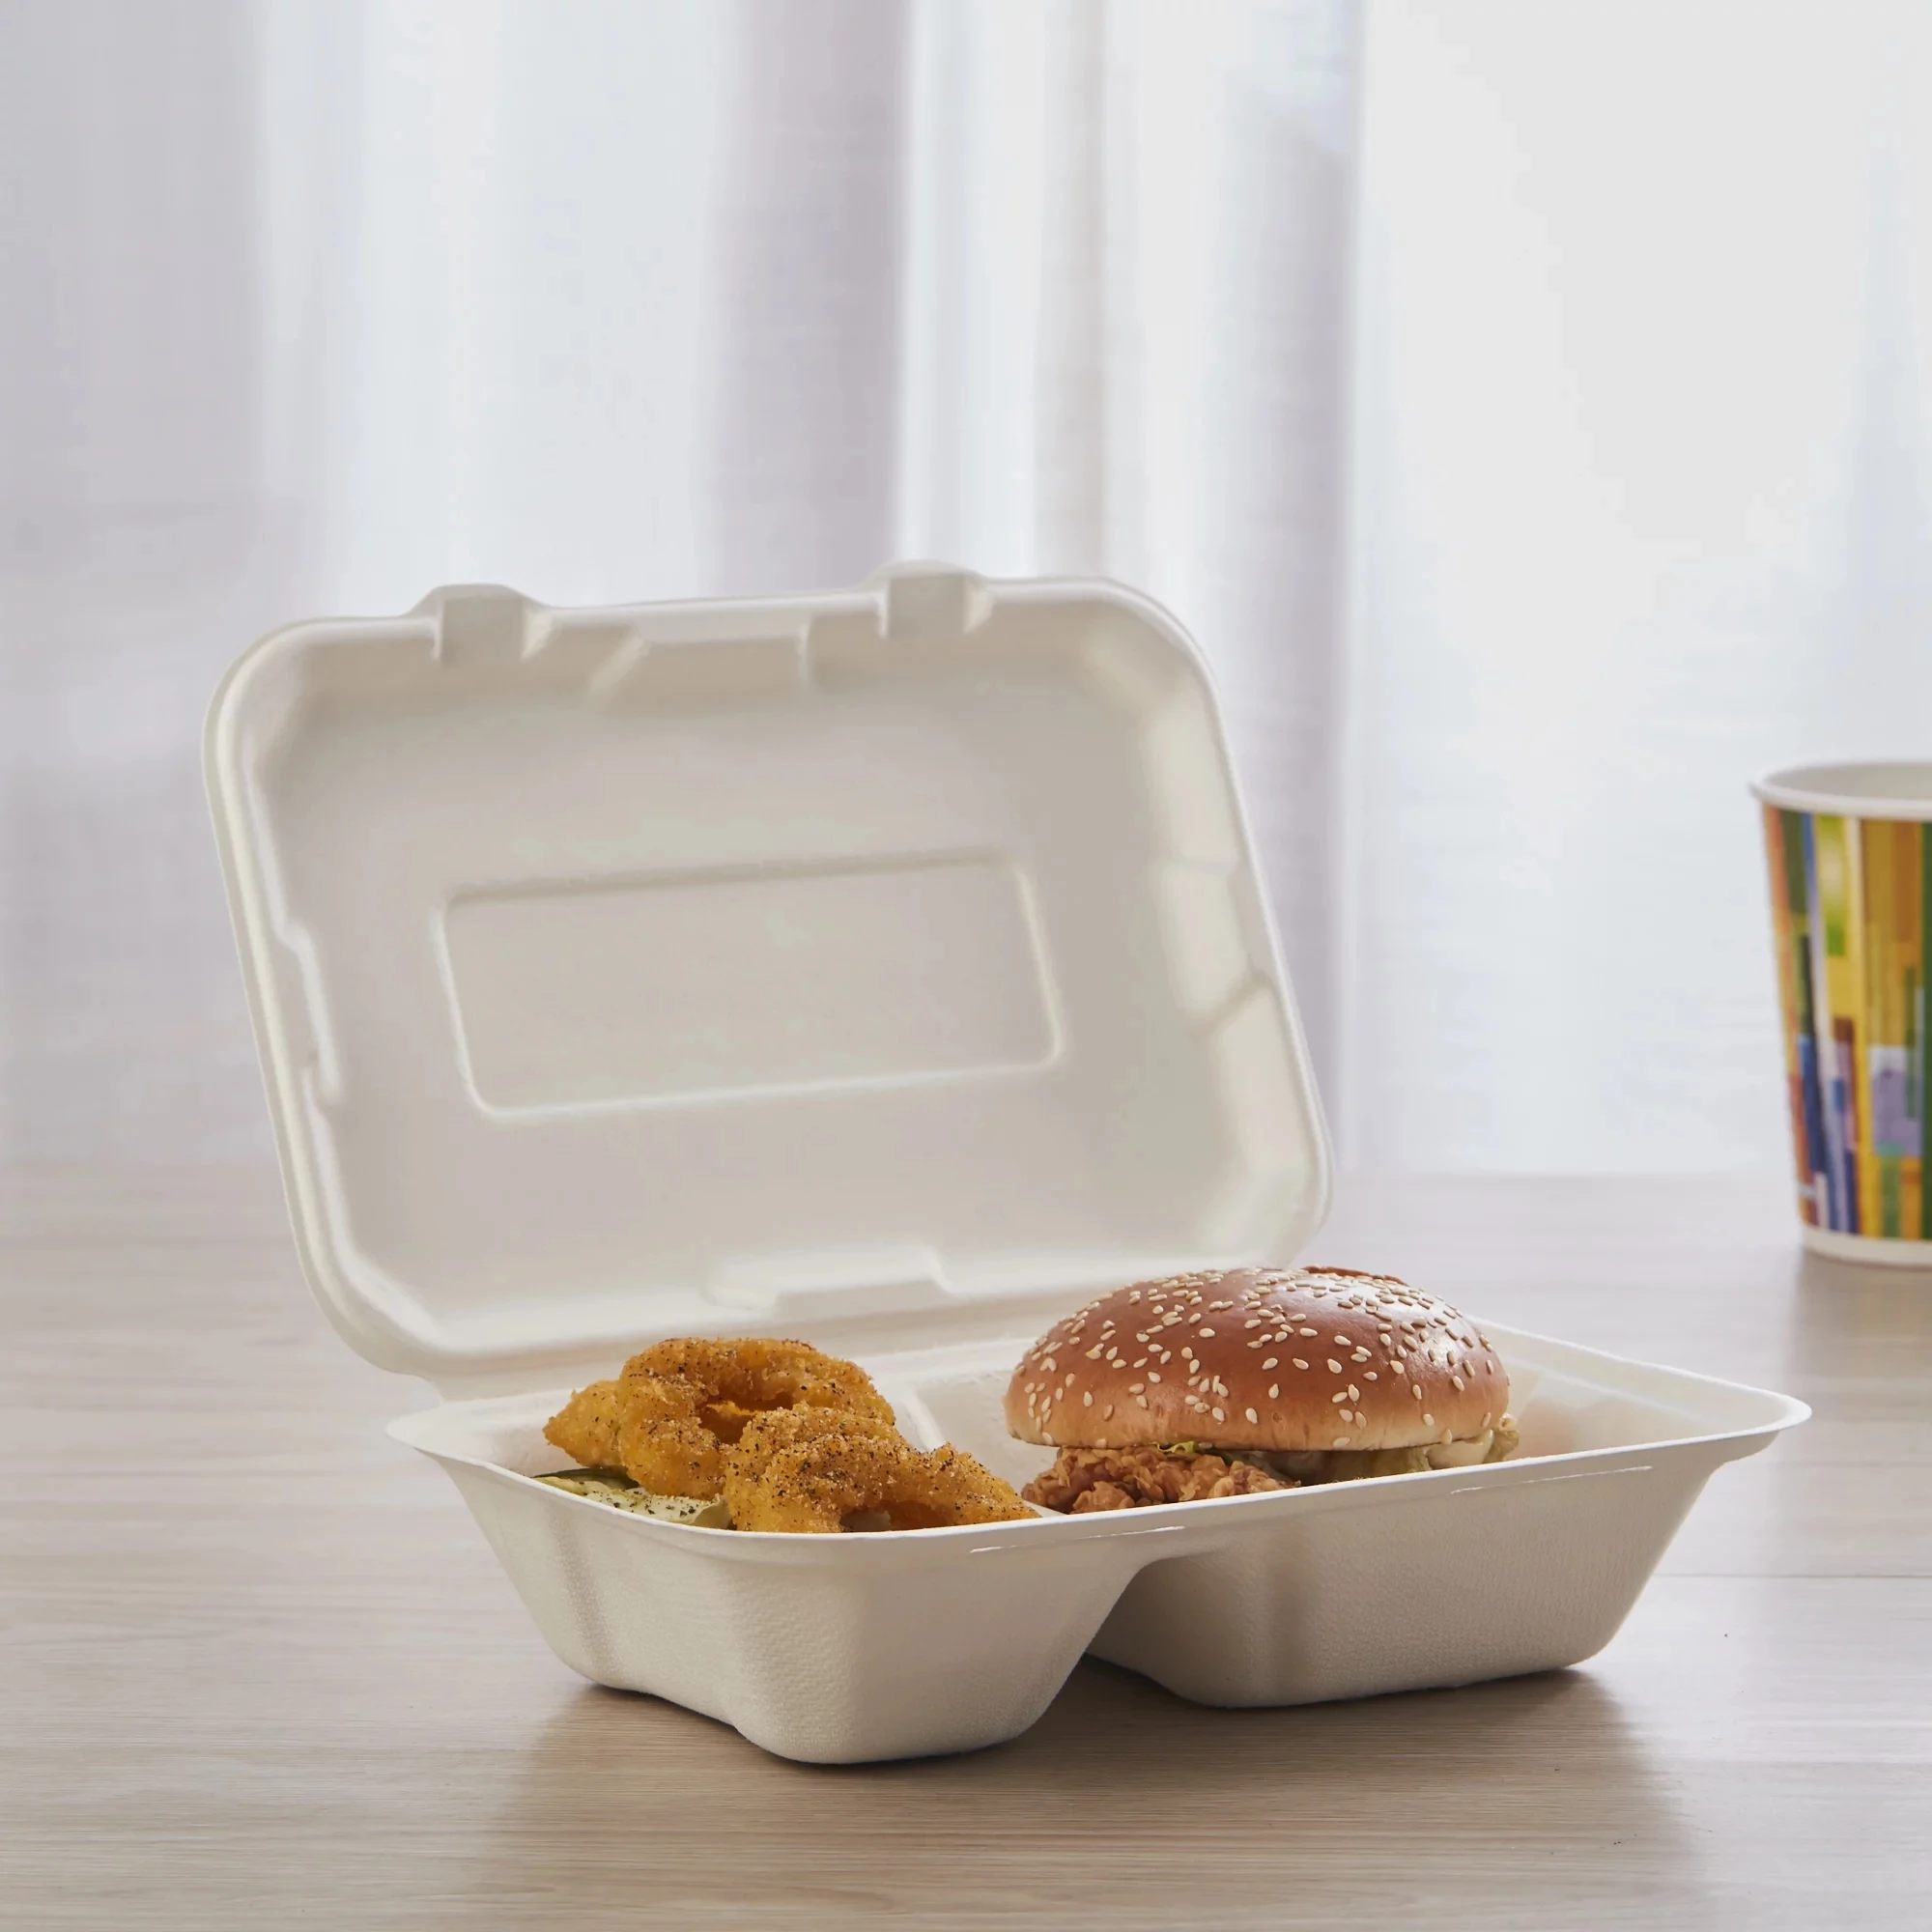 

Bagasse Sugarcane Disposable Compostable Biodegradable Bento Box Food Container Paper Box 9x6inch 2 compartment Eco Friendly